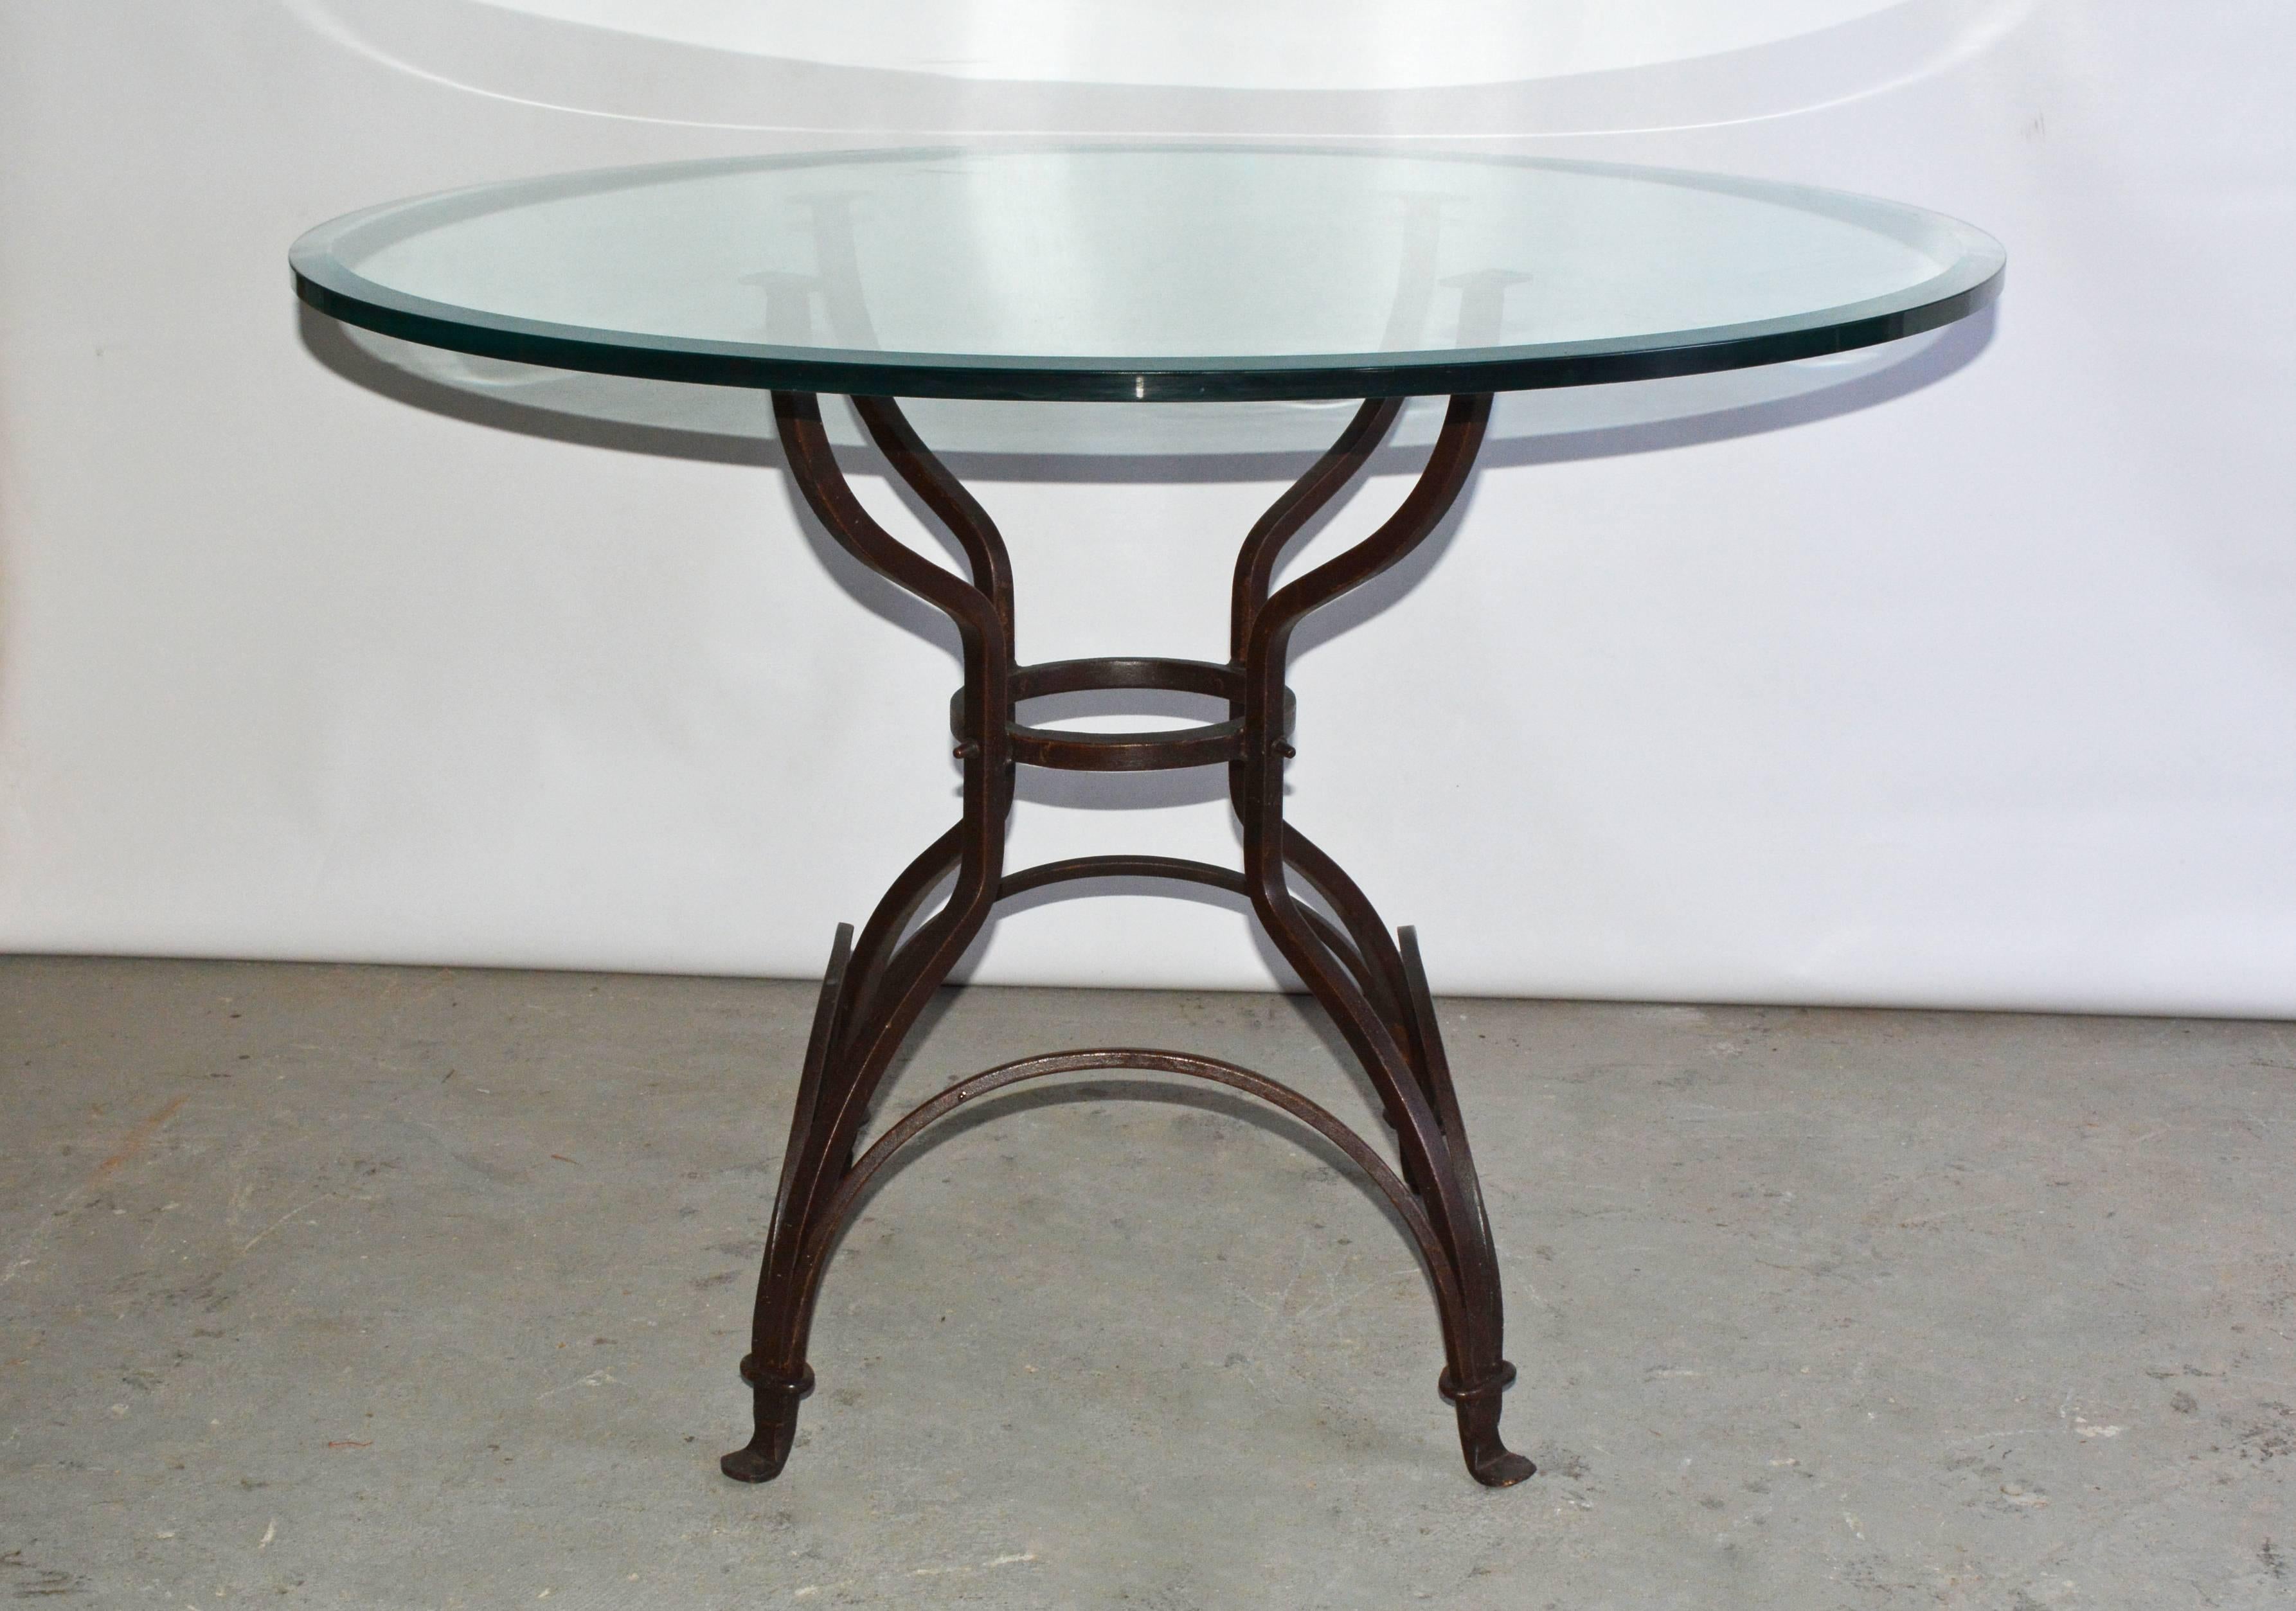 Indoor or outdoor iron metal base and glass top pedestal dining or breakfast table. Top and base can be sold separately. Top: 300, Base: $1300
Base can support stone, glass or wood.
Base Dimensions: 20 x 20 x 29 inches high.

